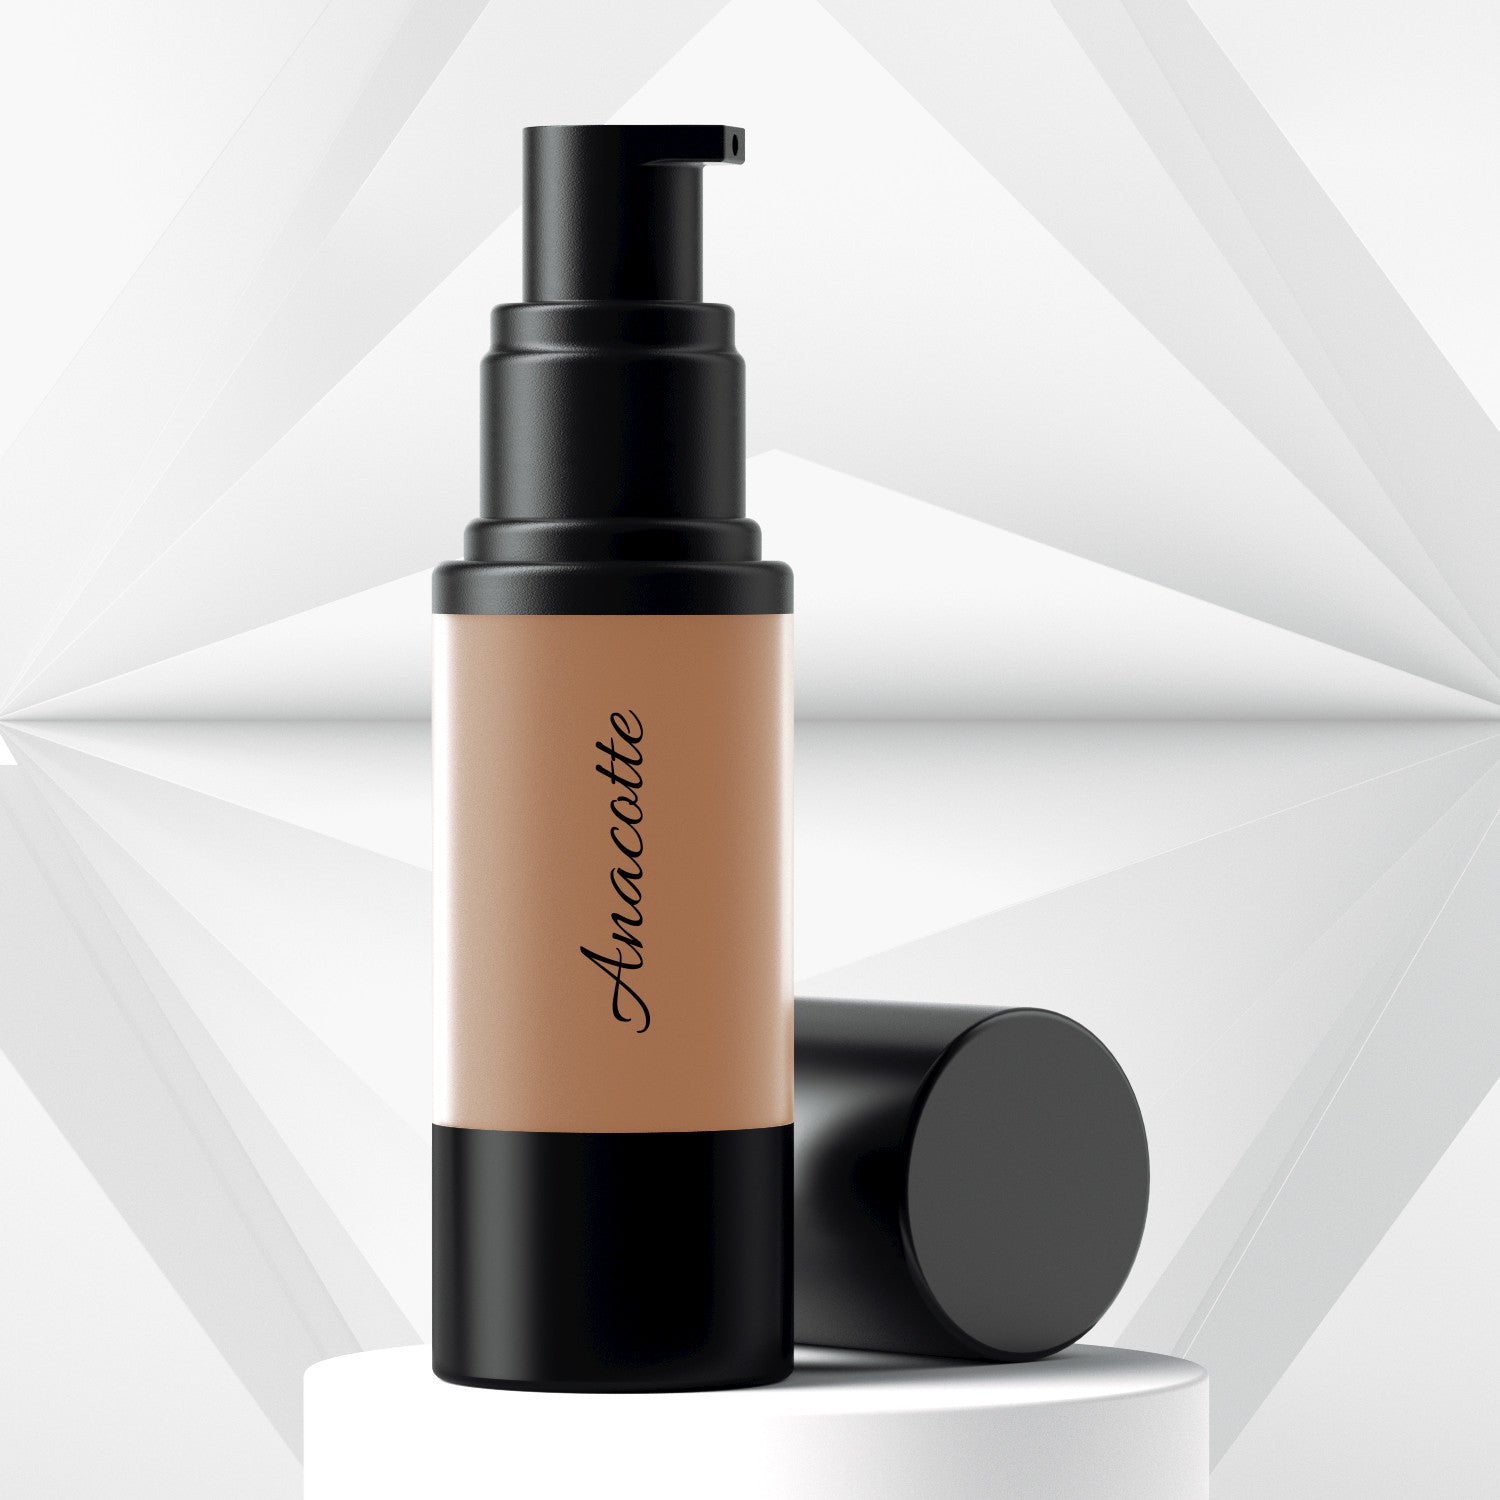 Anacotte Anti-aging Oil-Free Foundation Makeup light